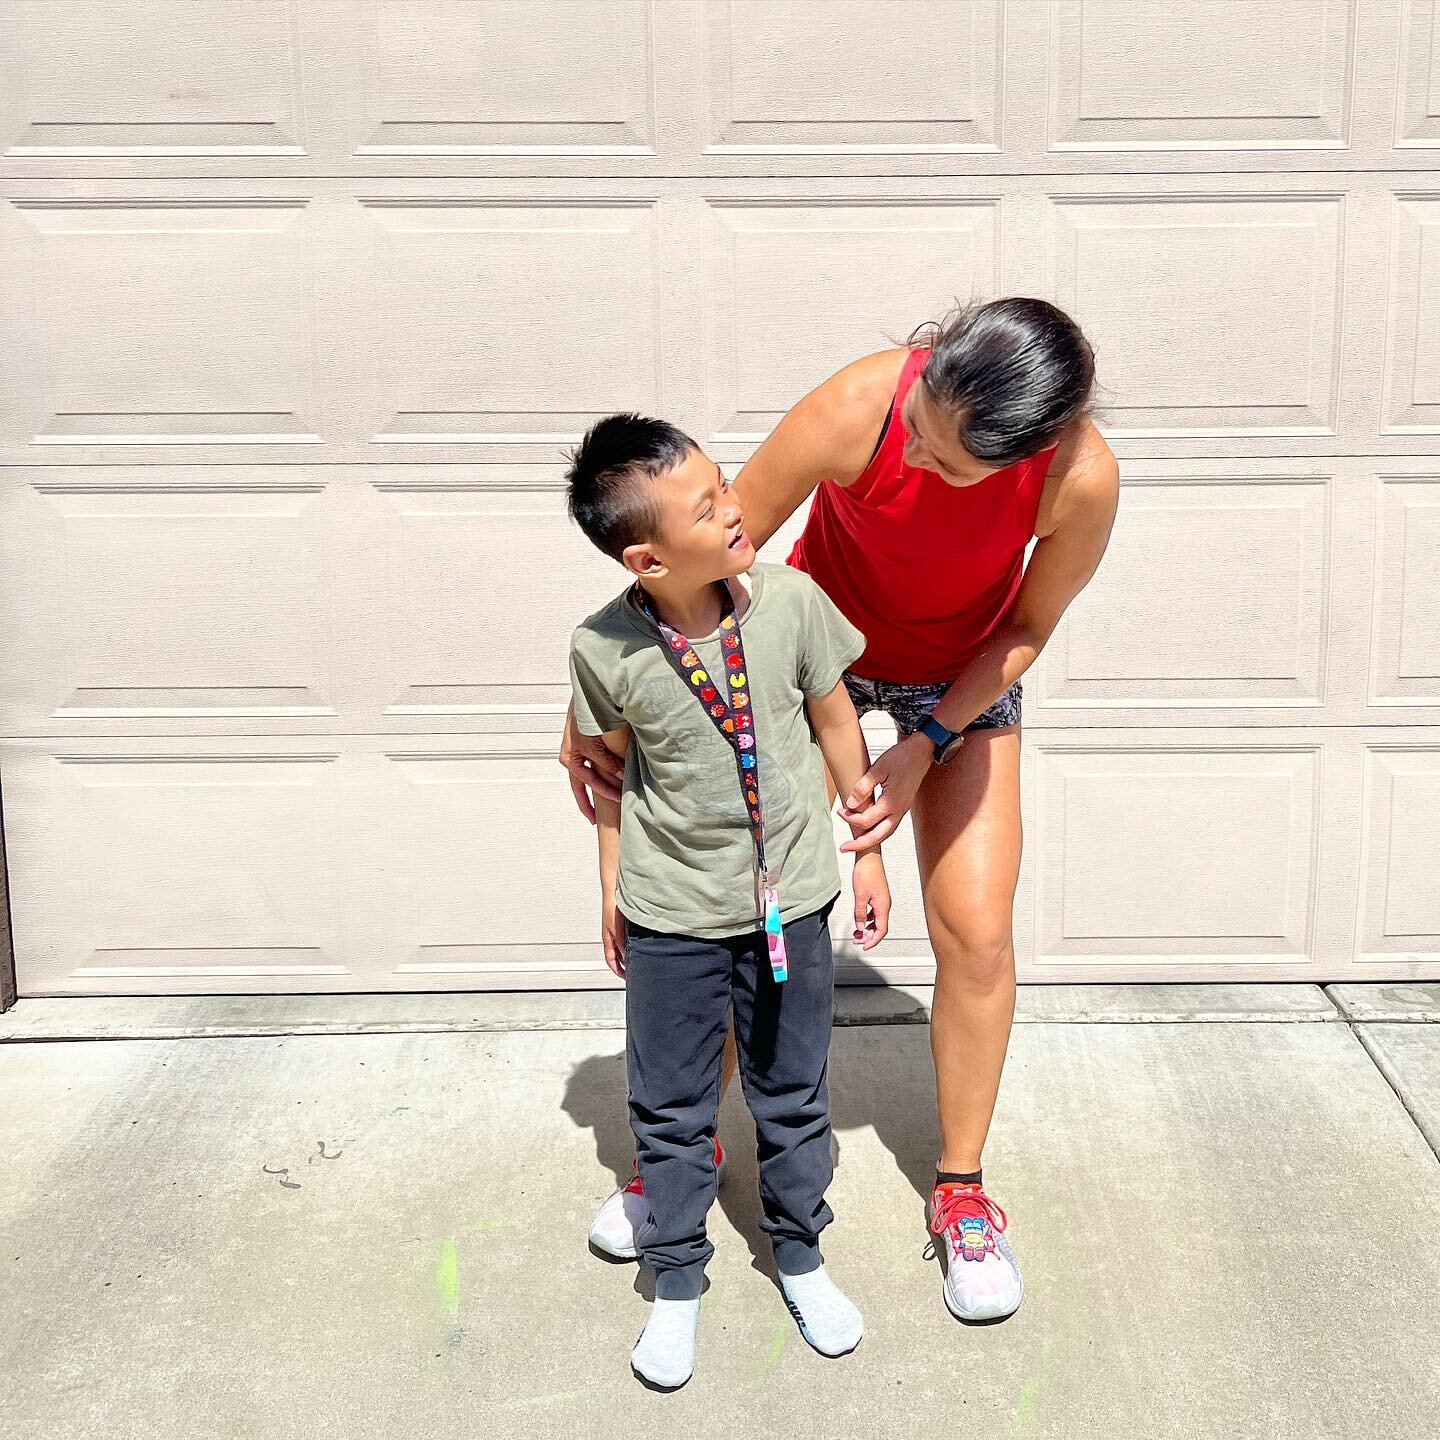 Friday!  We are so happy for Friday. Long week, ending it with a little joy - running! 

What&rsquo;s brought YOU joy this week or even just today?  Celebrate the small things that put a smile on your face. 

ID: Asher and mom standing in front of ga